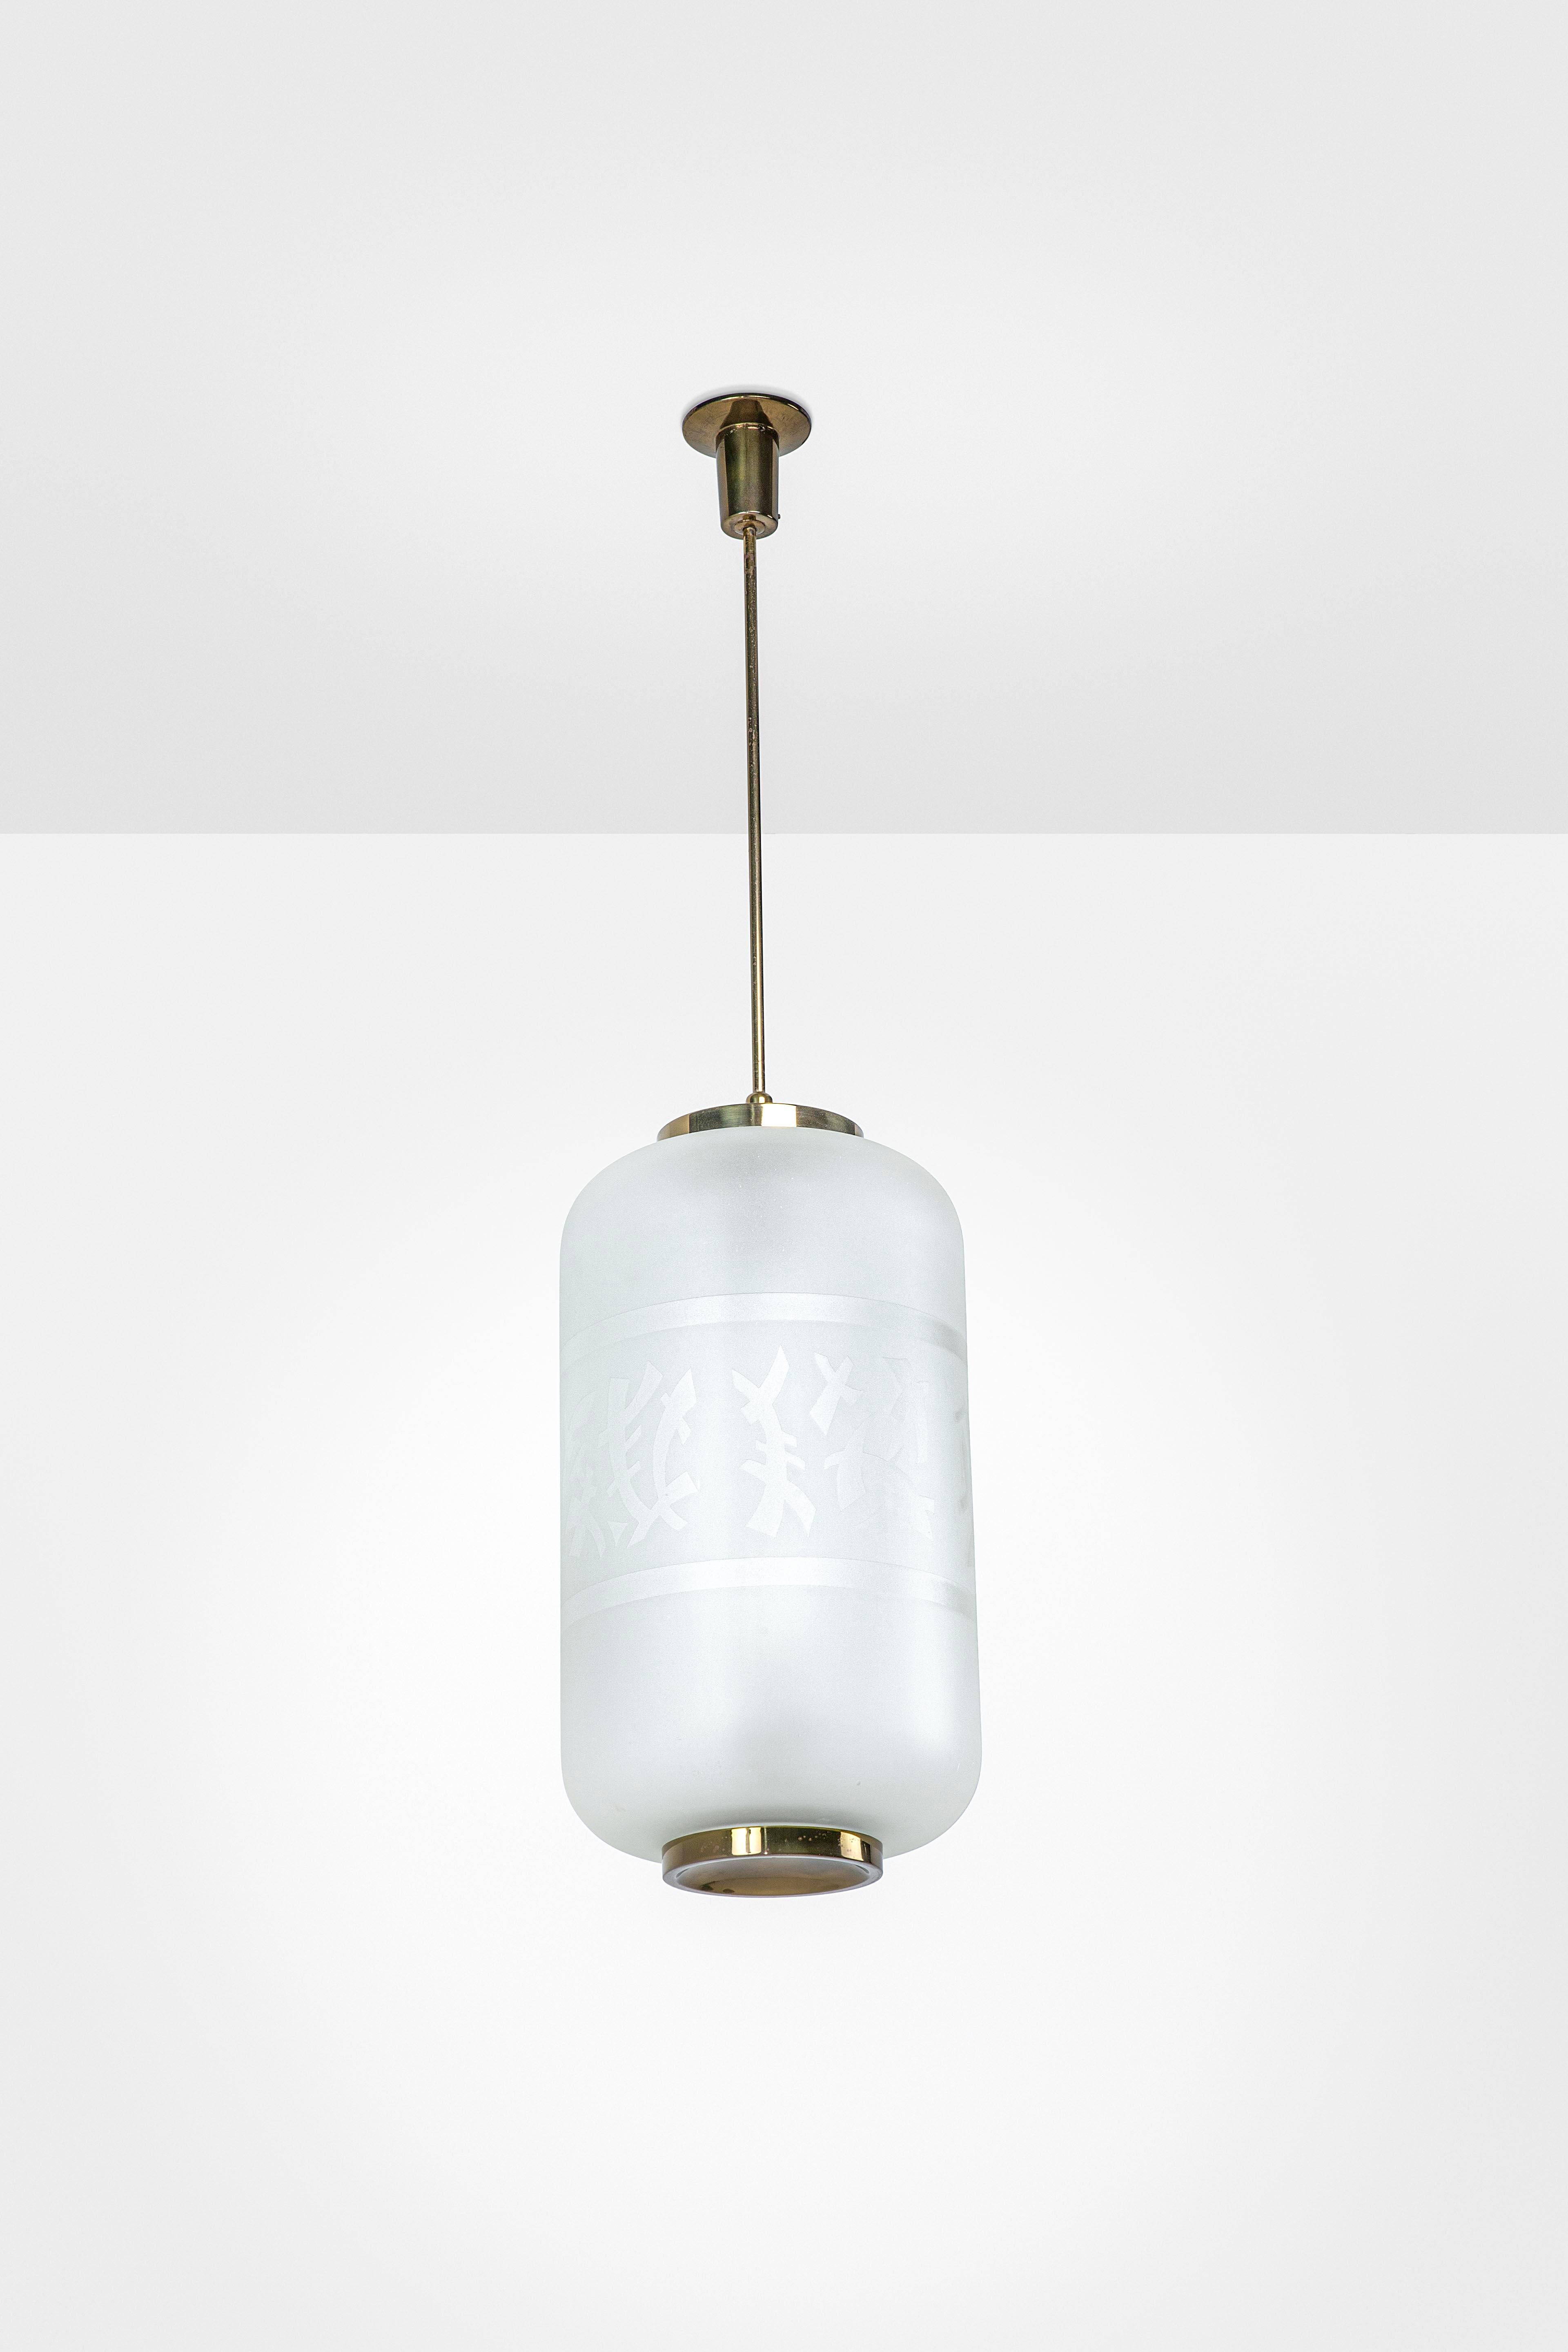 Angelo Lelii has created exceptional lighting elements, and this pendant lamp mod. 12724 is one of those icons that entered the imagination of the 50s. The structure is in brass and the diffuser is in frosted and acid-corroded glass